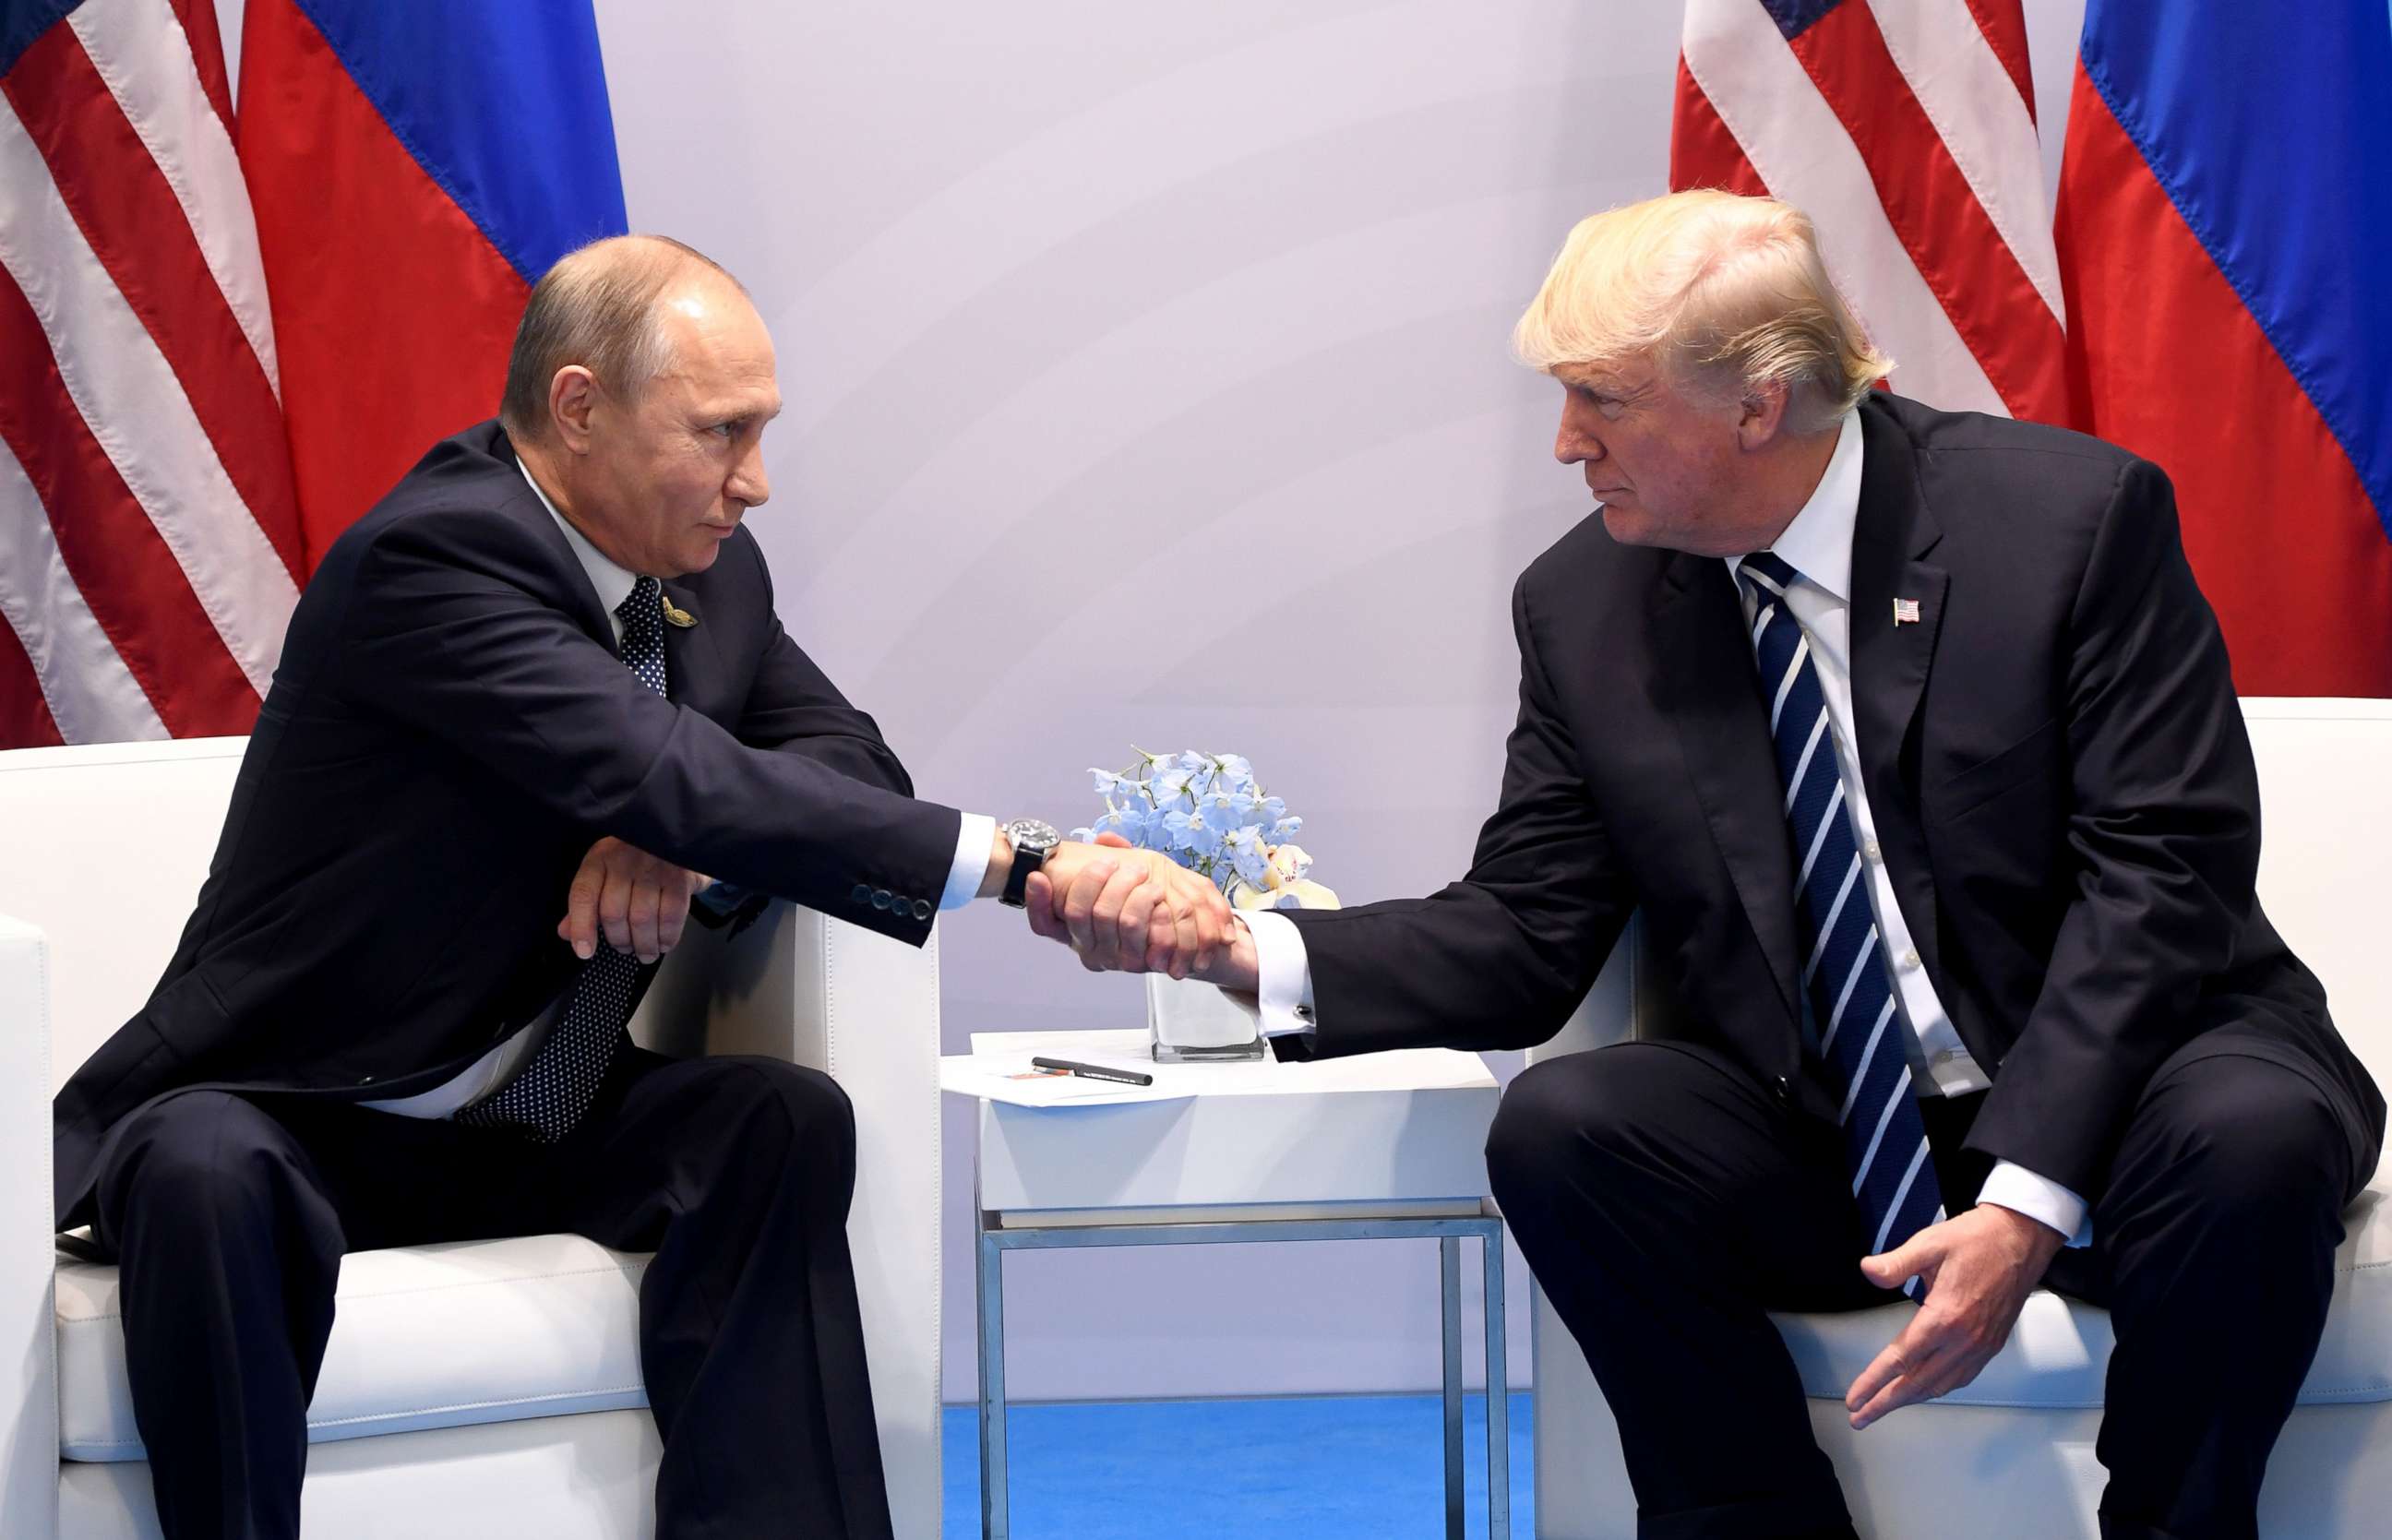 PHOTO: President Donald Trump and Russia's President Vladimir Putin shake hands during a meeting on the sidelines of the G20 Summit in Hamburg, Germany, July 7, 2017. 